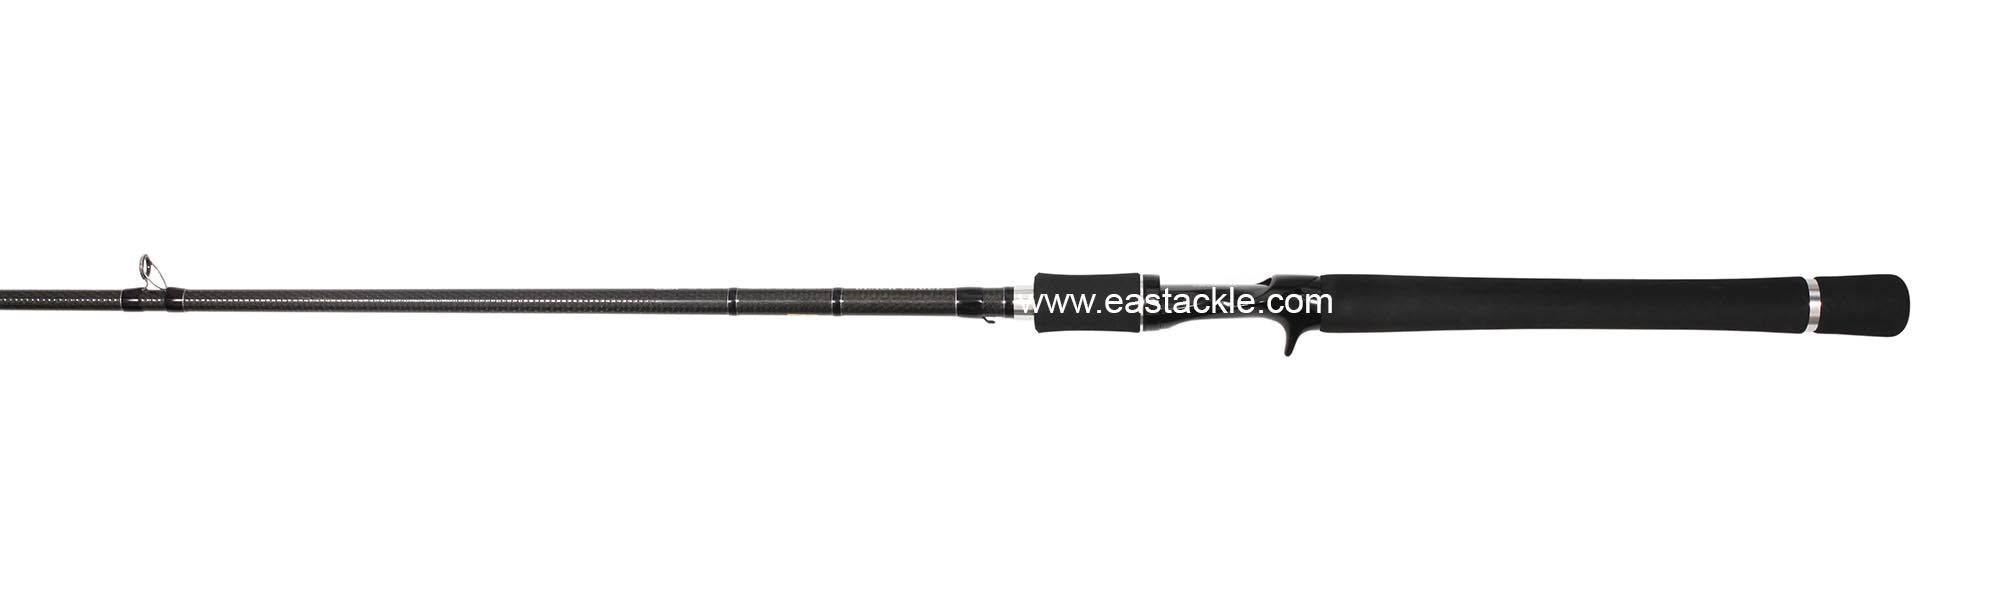 Daiwa - Black Label 701XXHB - Bait Casting Rod - Butt to Stripper Guide (Side View) | Eastackle